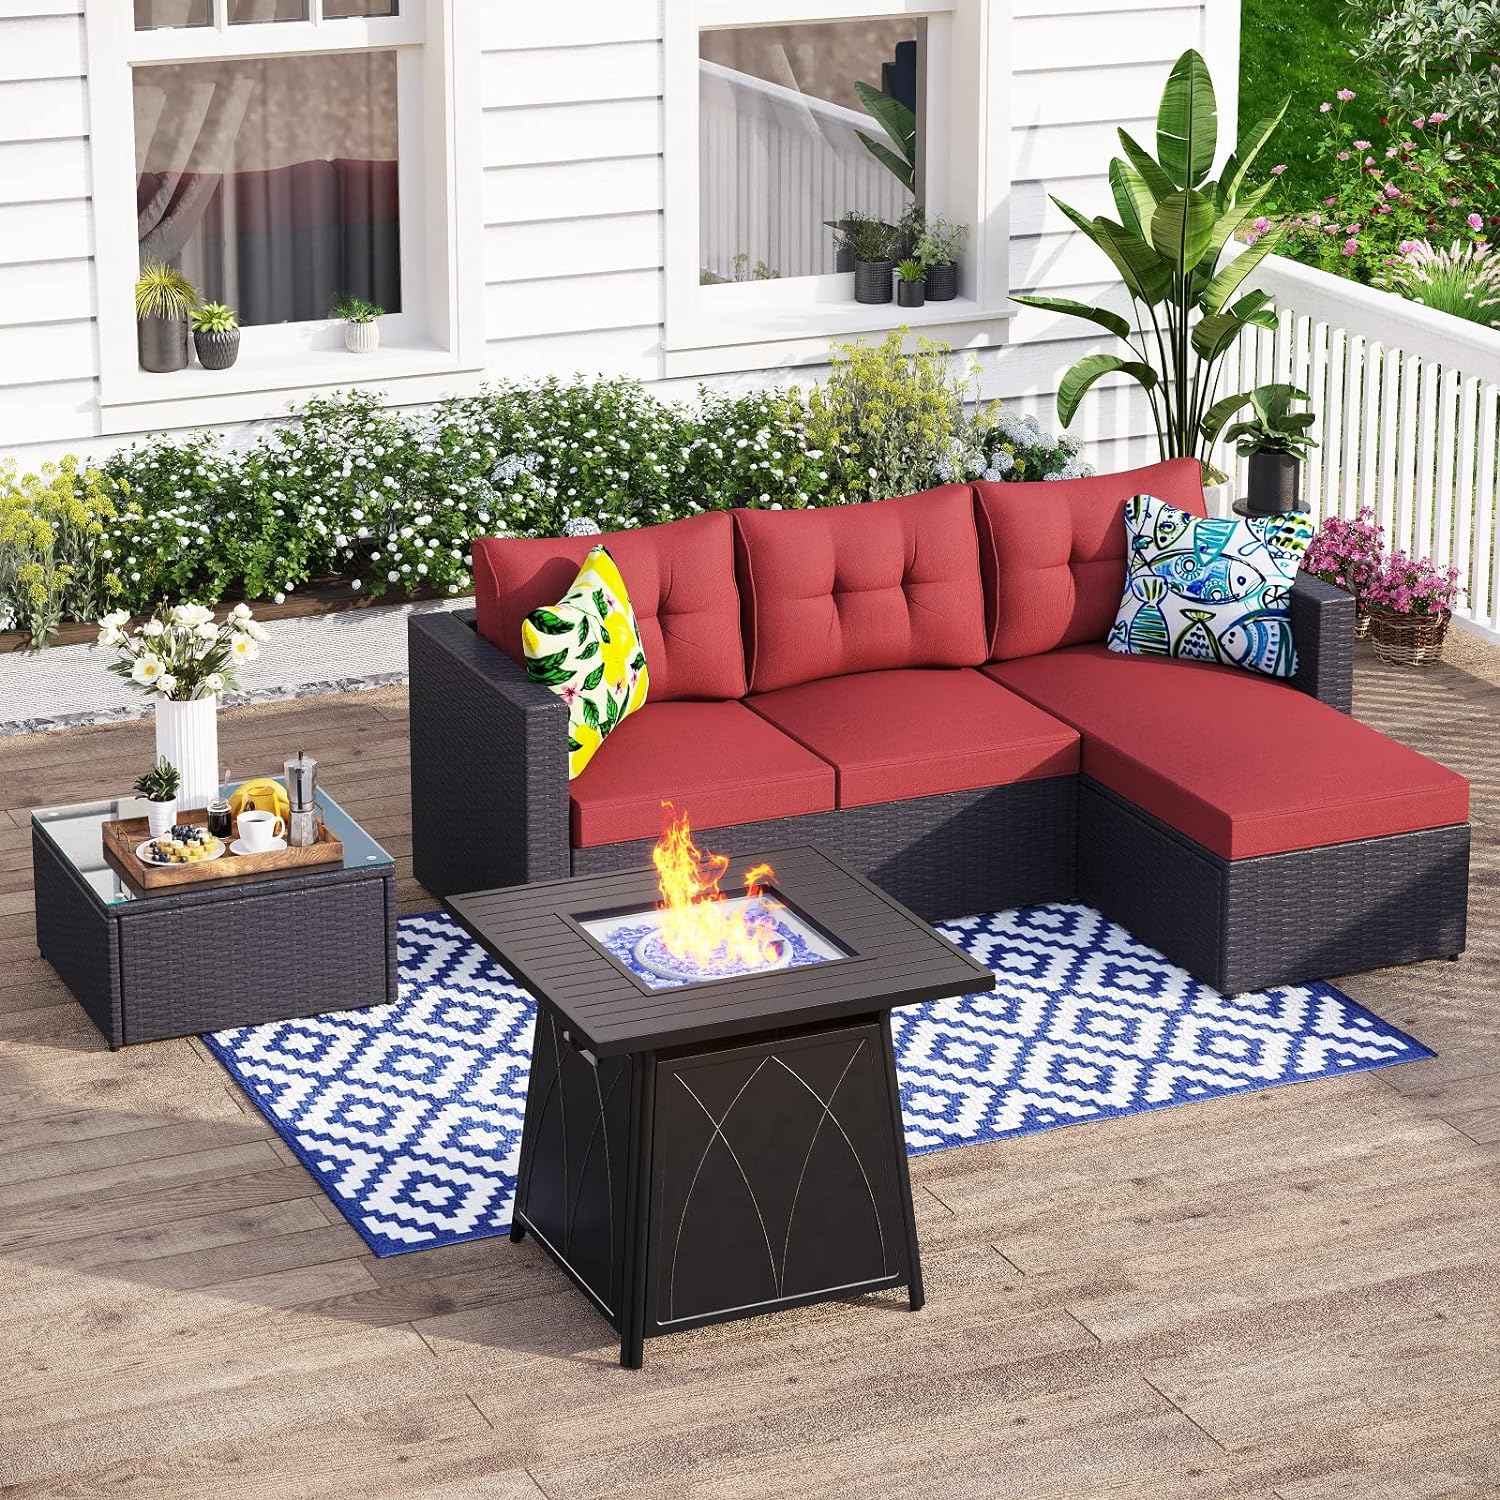 MFSTUDIO 4 Pieces Patio Furniture Set with Fire Pit Table, Outdoor Sectional Wicker Patio Sofa Sets, 28 50000BTU Propane Fire Pit Patio Conversation Set with Glass Coffee Table & Rattan Couch-Red